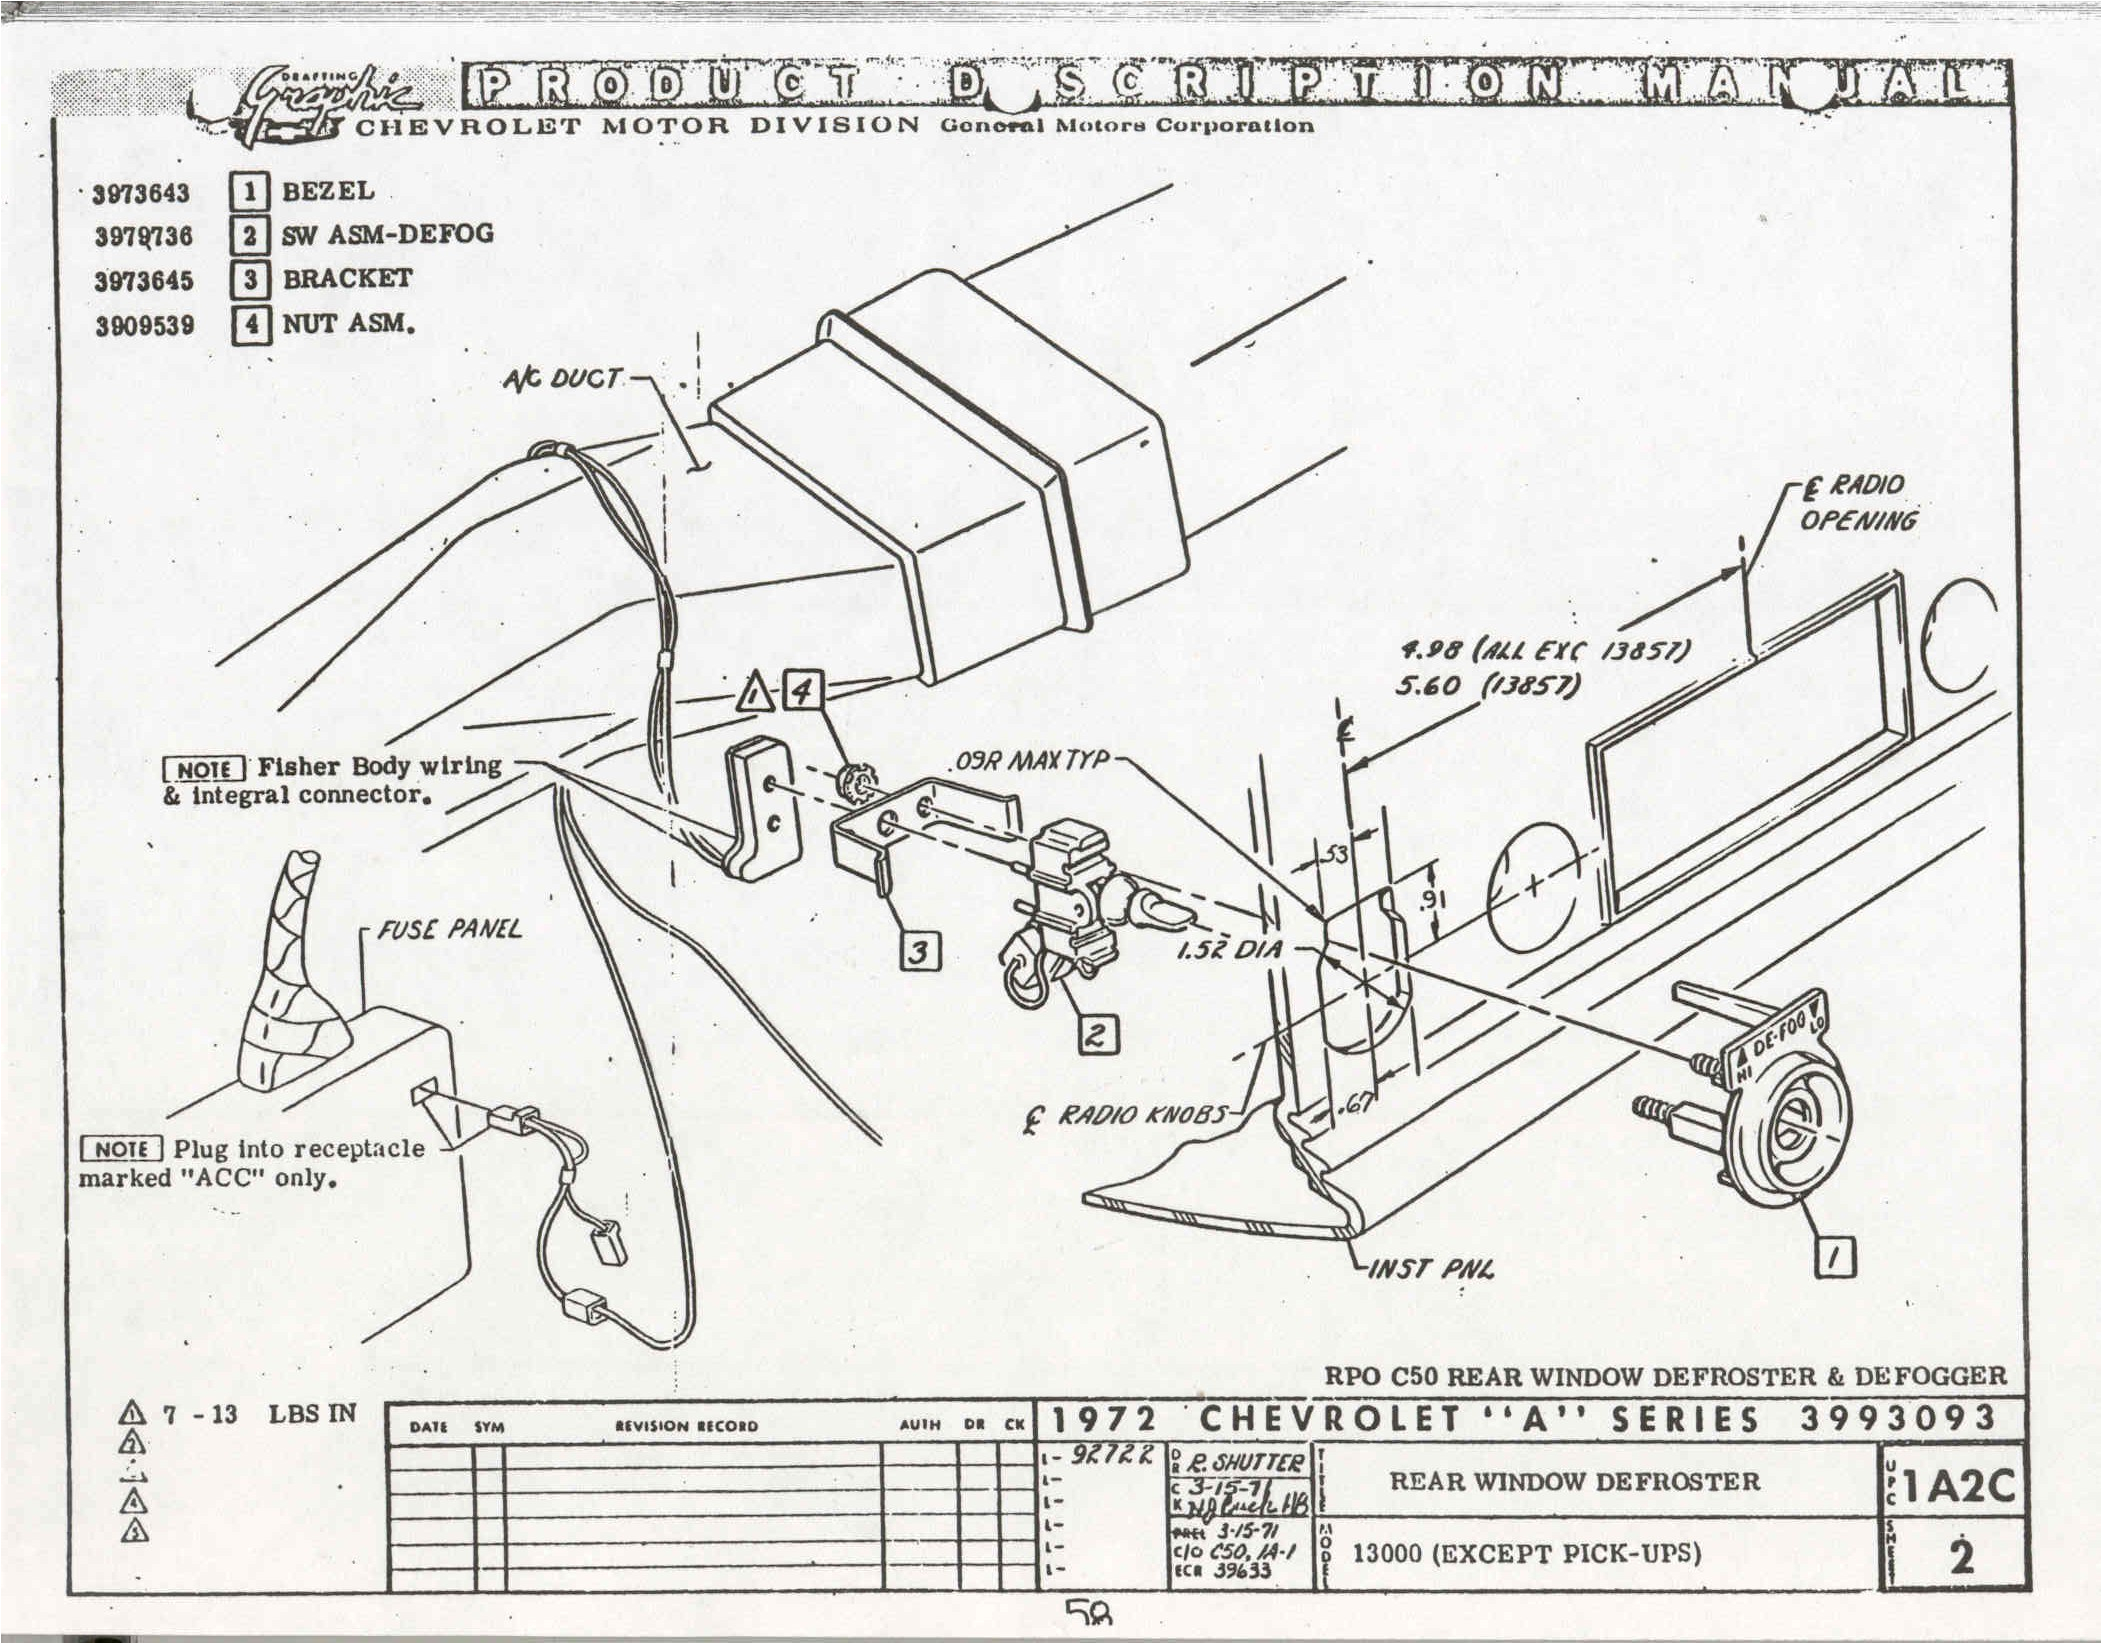 cowl induction wiring diagram further chevelle wiring